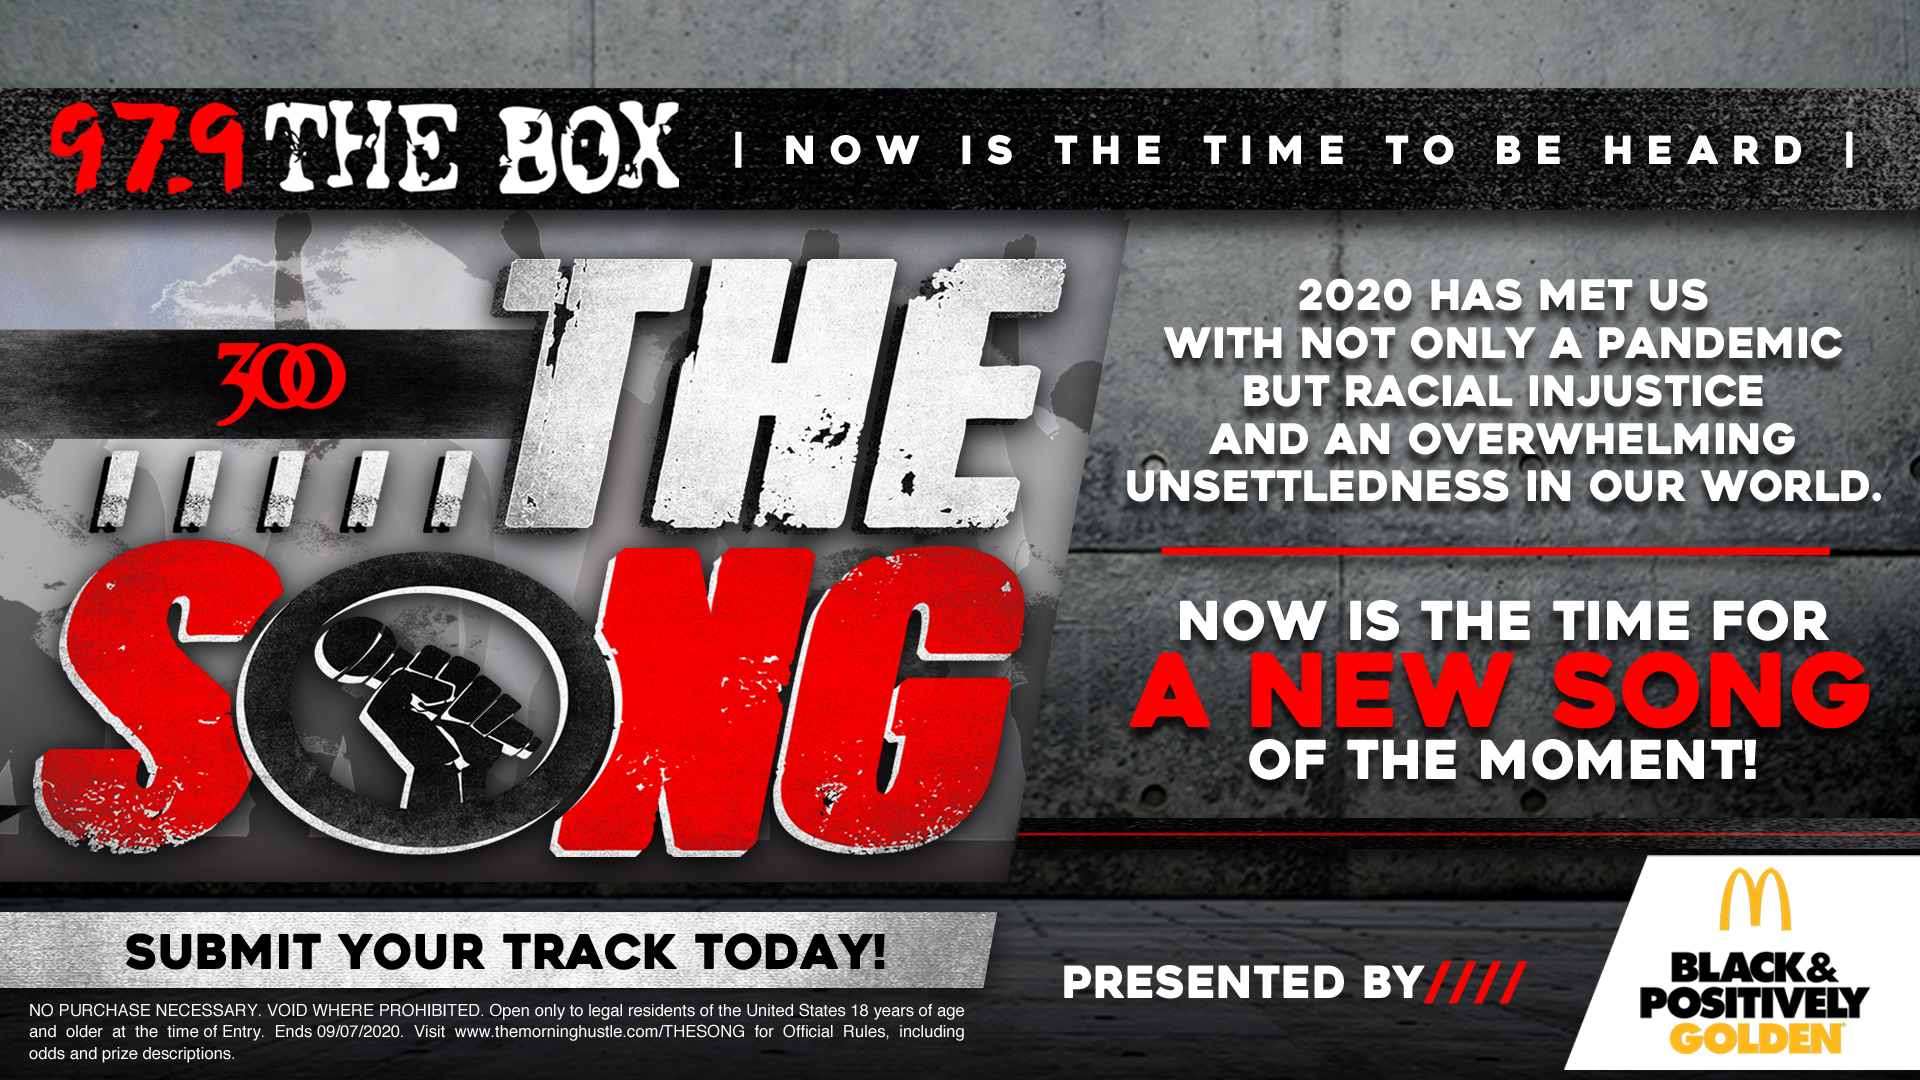 “The Song” Contest KBXX